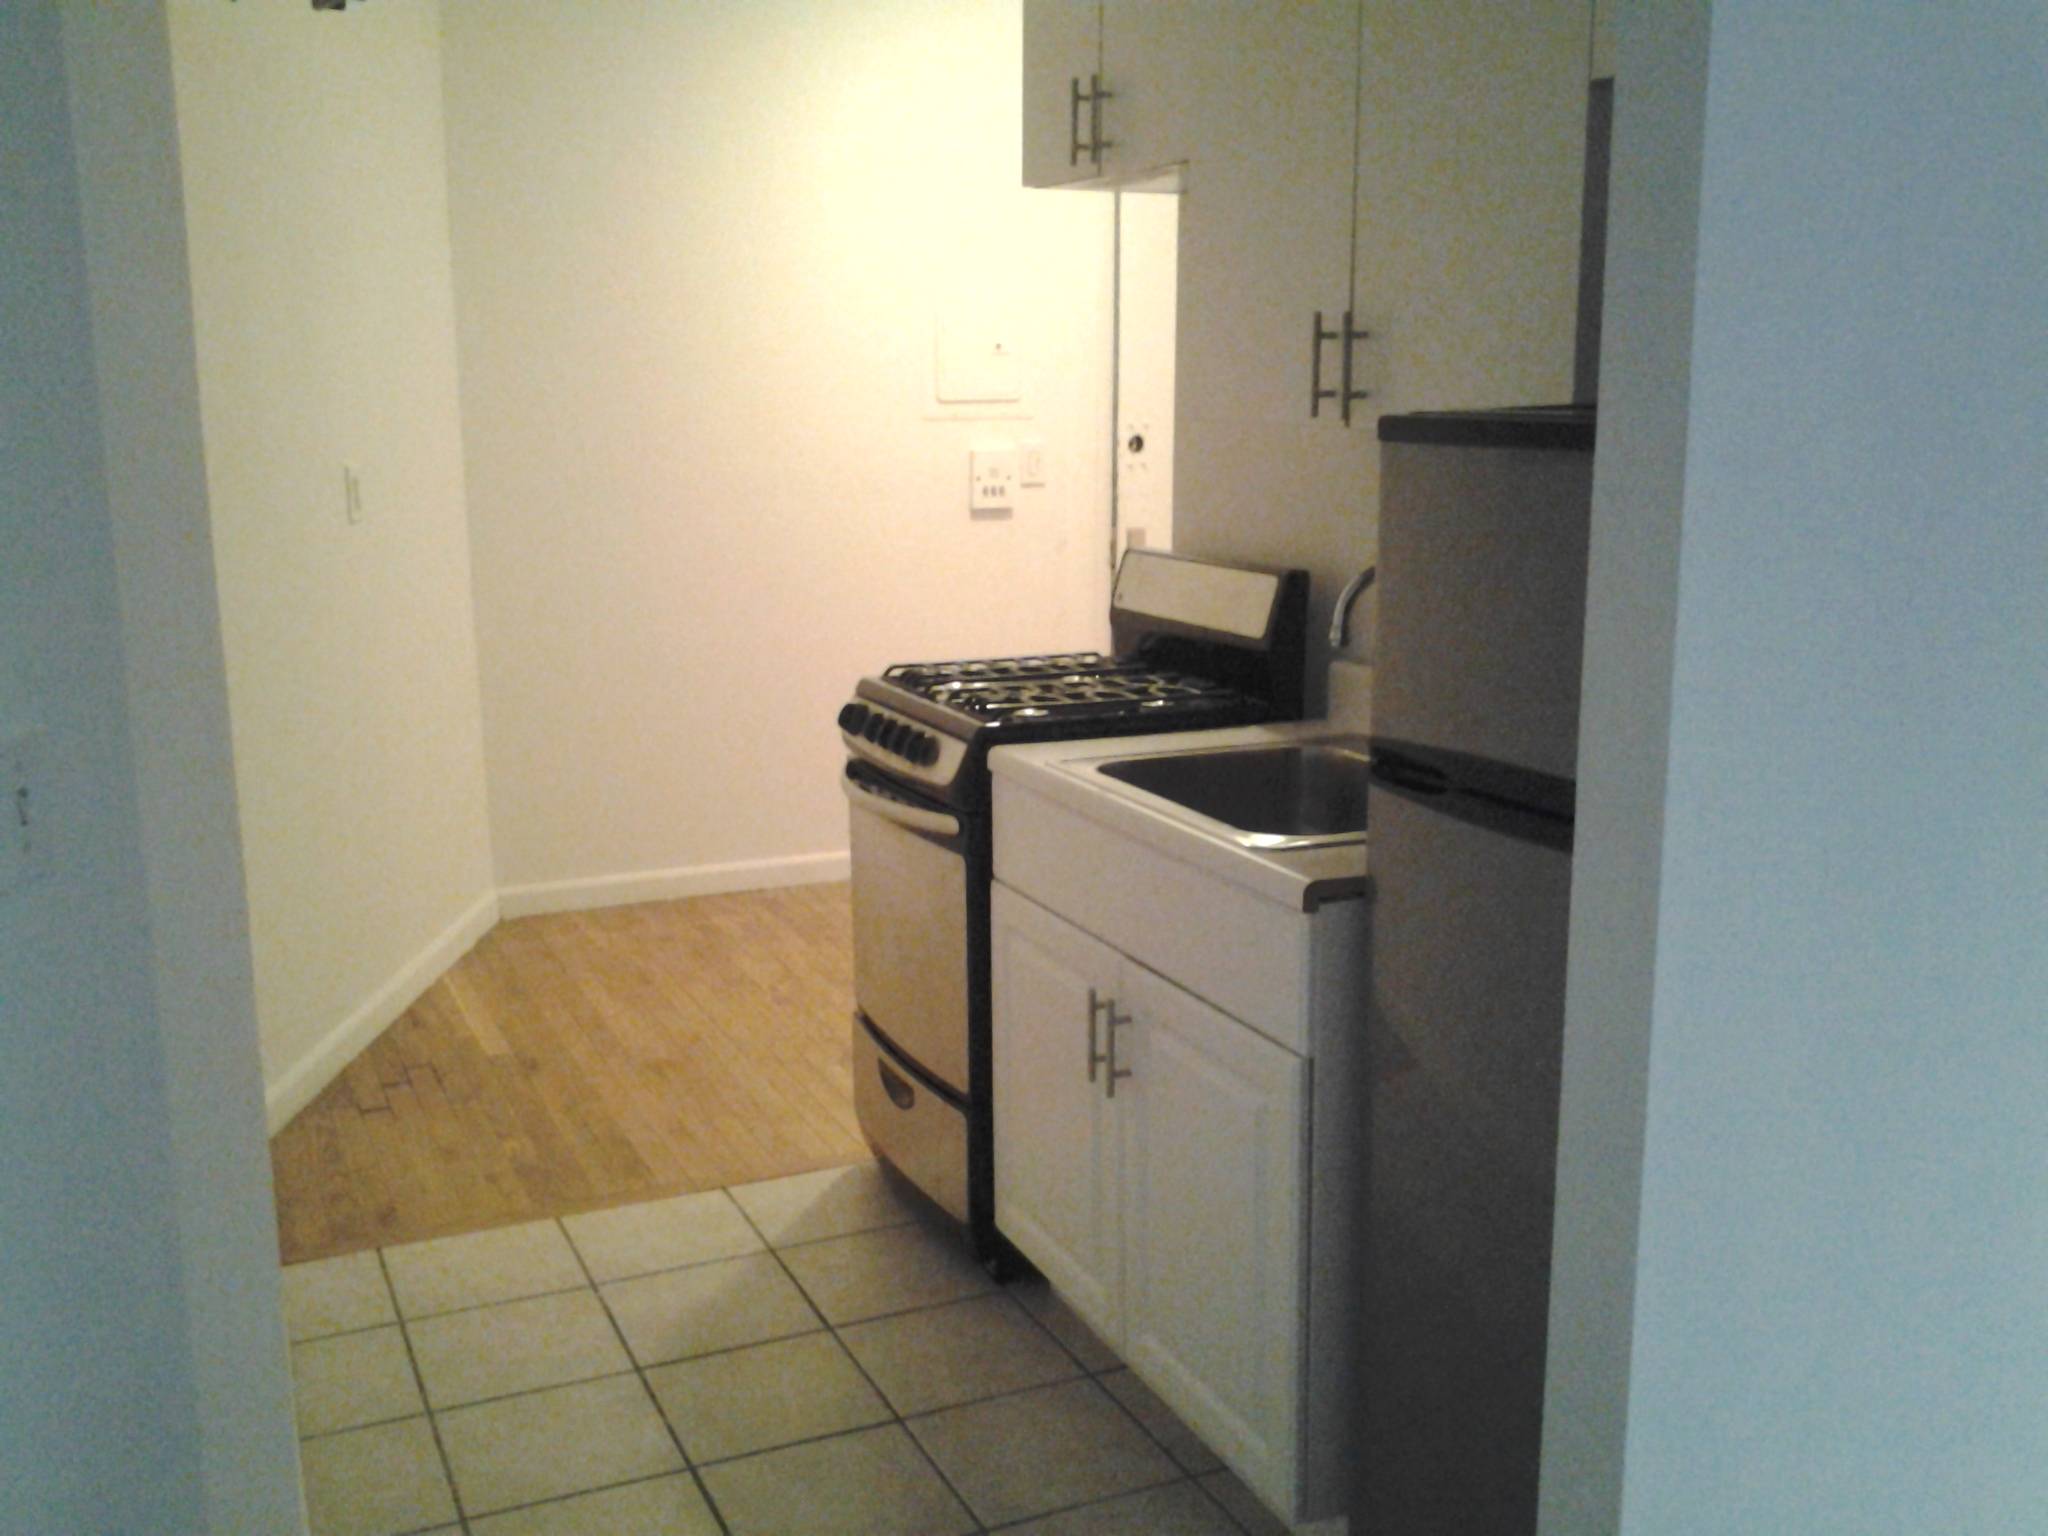 1 Bedroom Apt In Both Soho And Tribeca, The Best Of Both! Renovated.